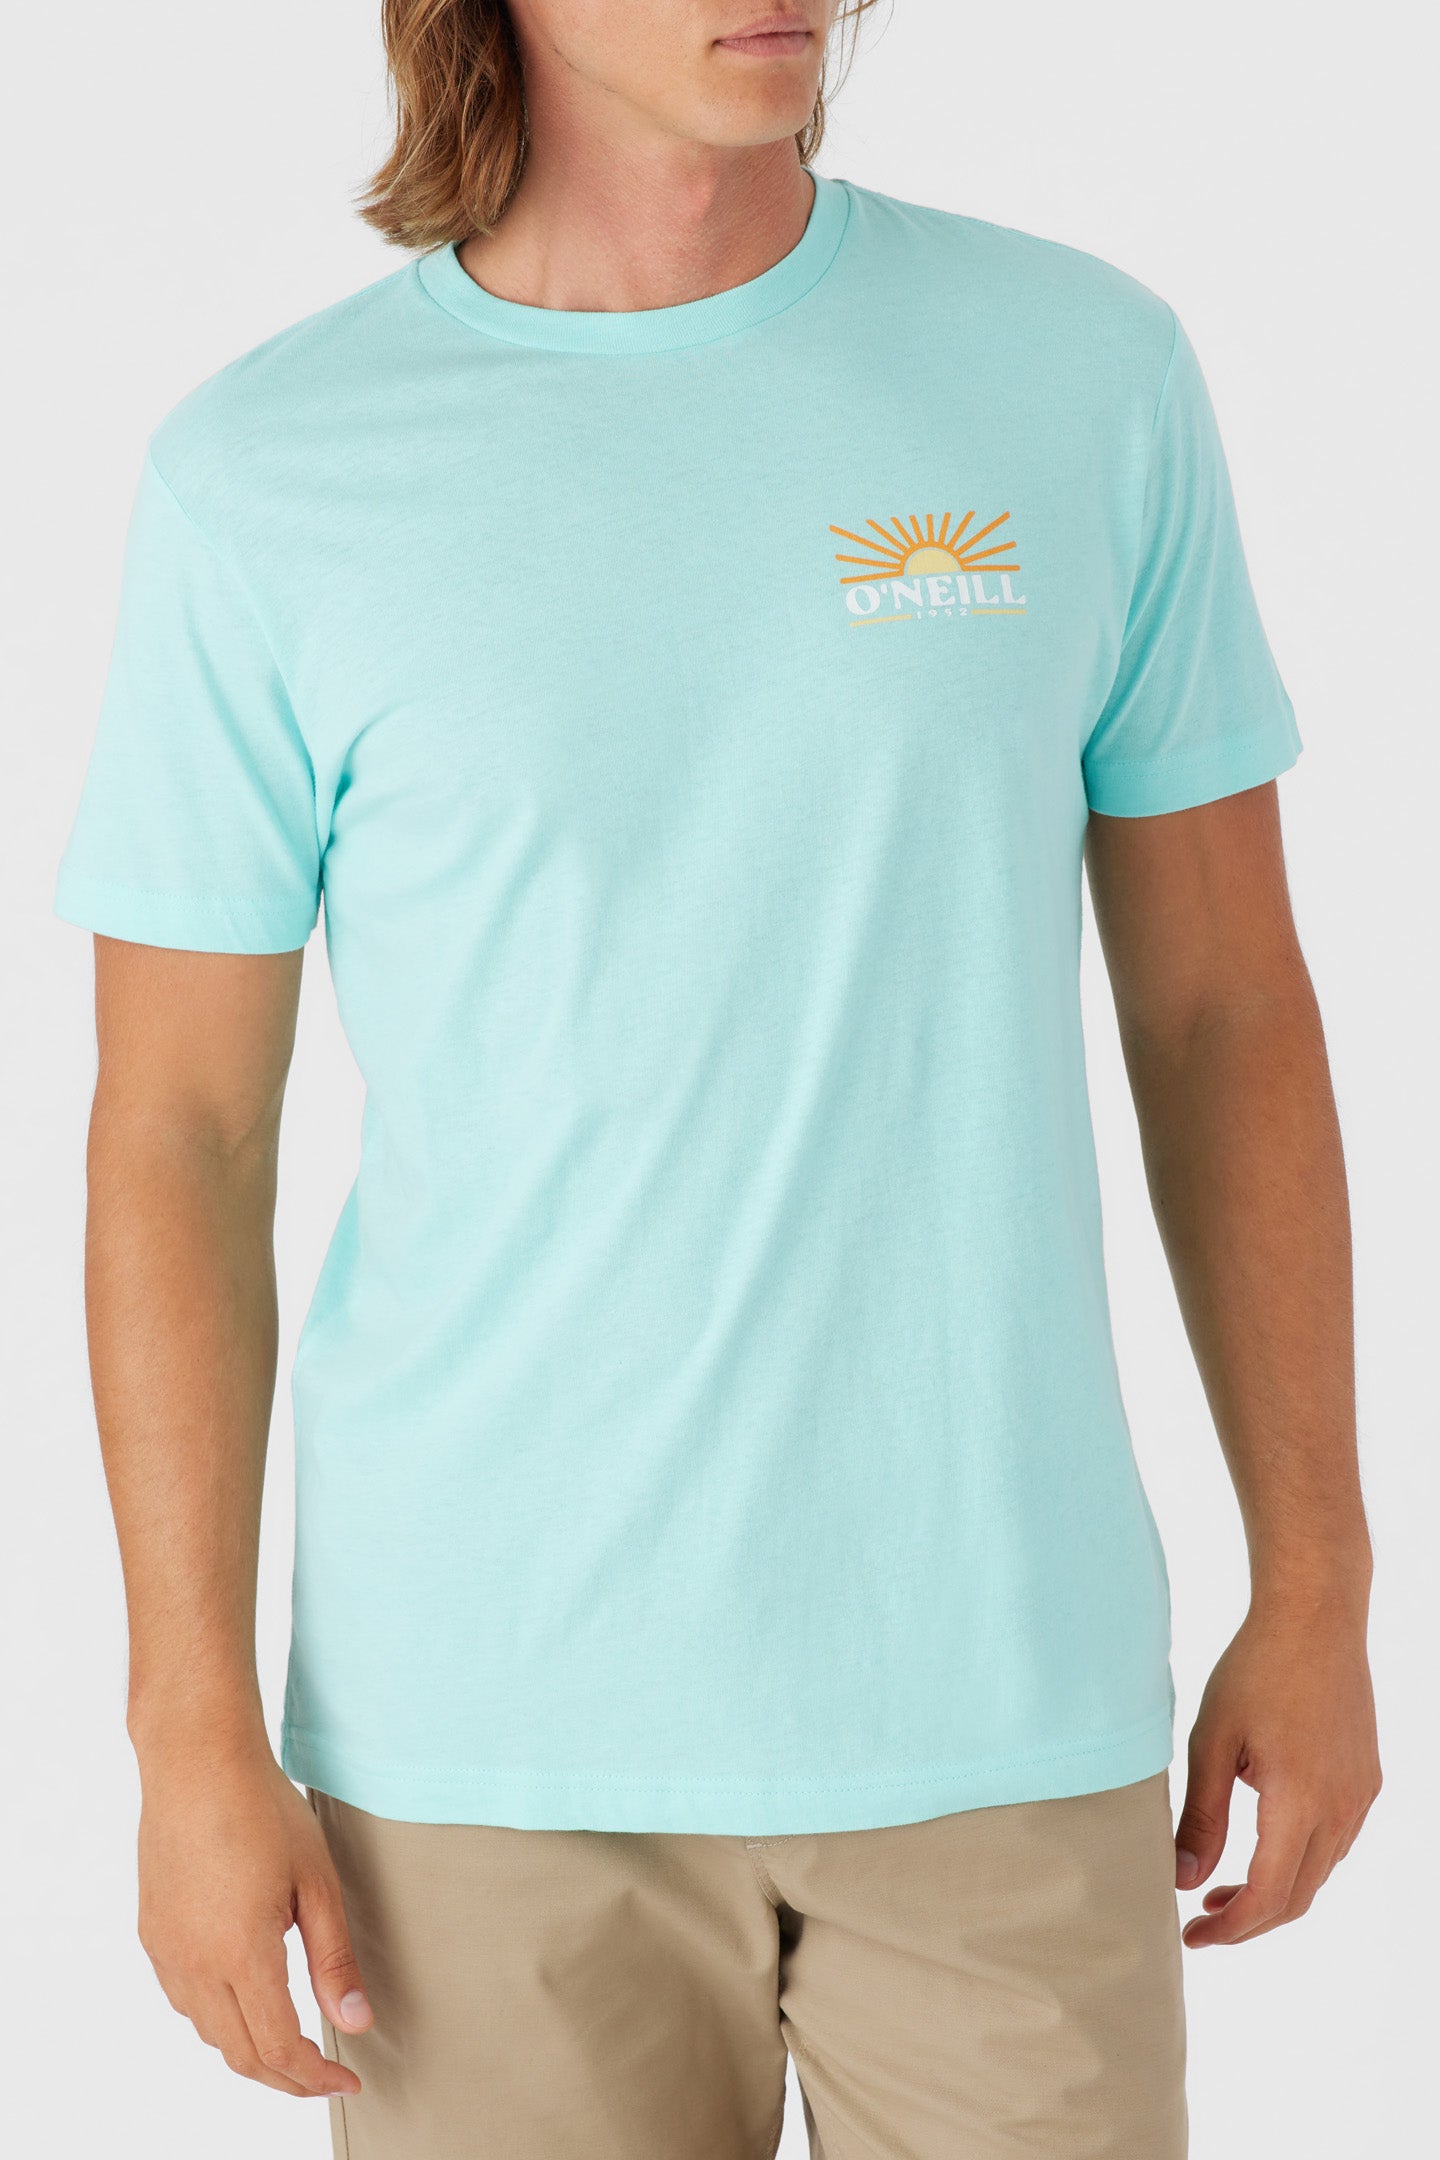 Sun Supply Standard Fit Tee - Turquoise | O'Neill